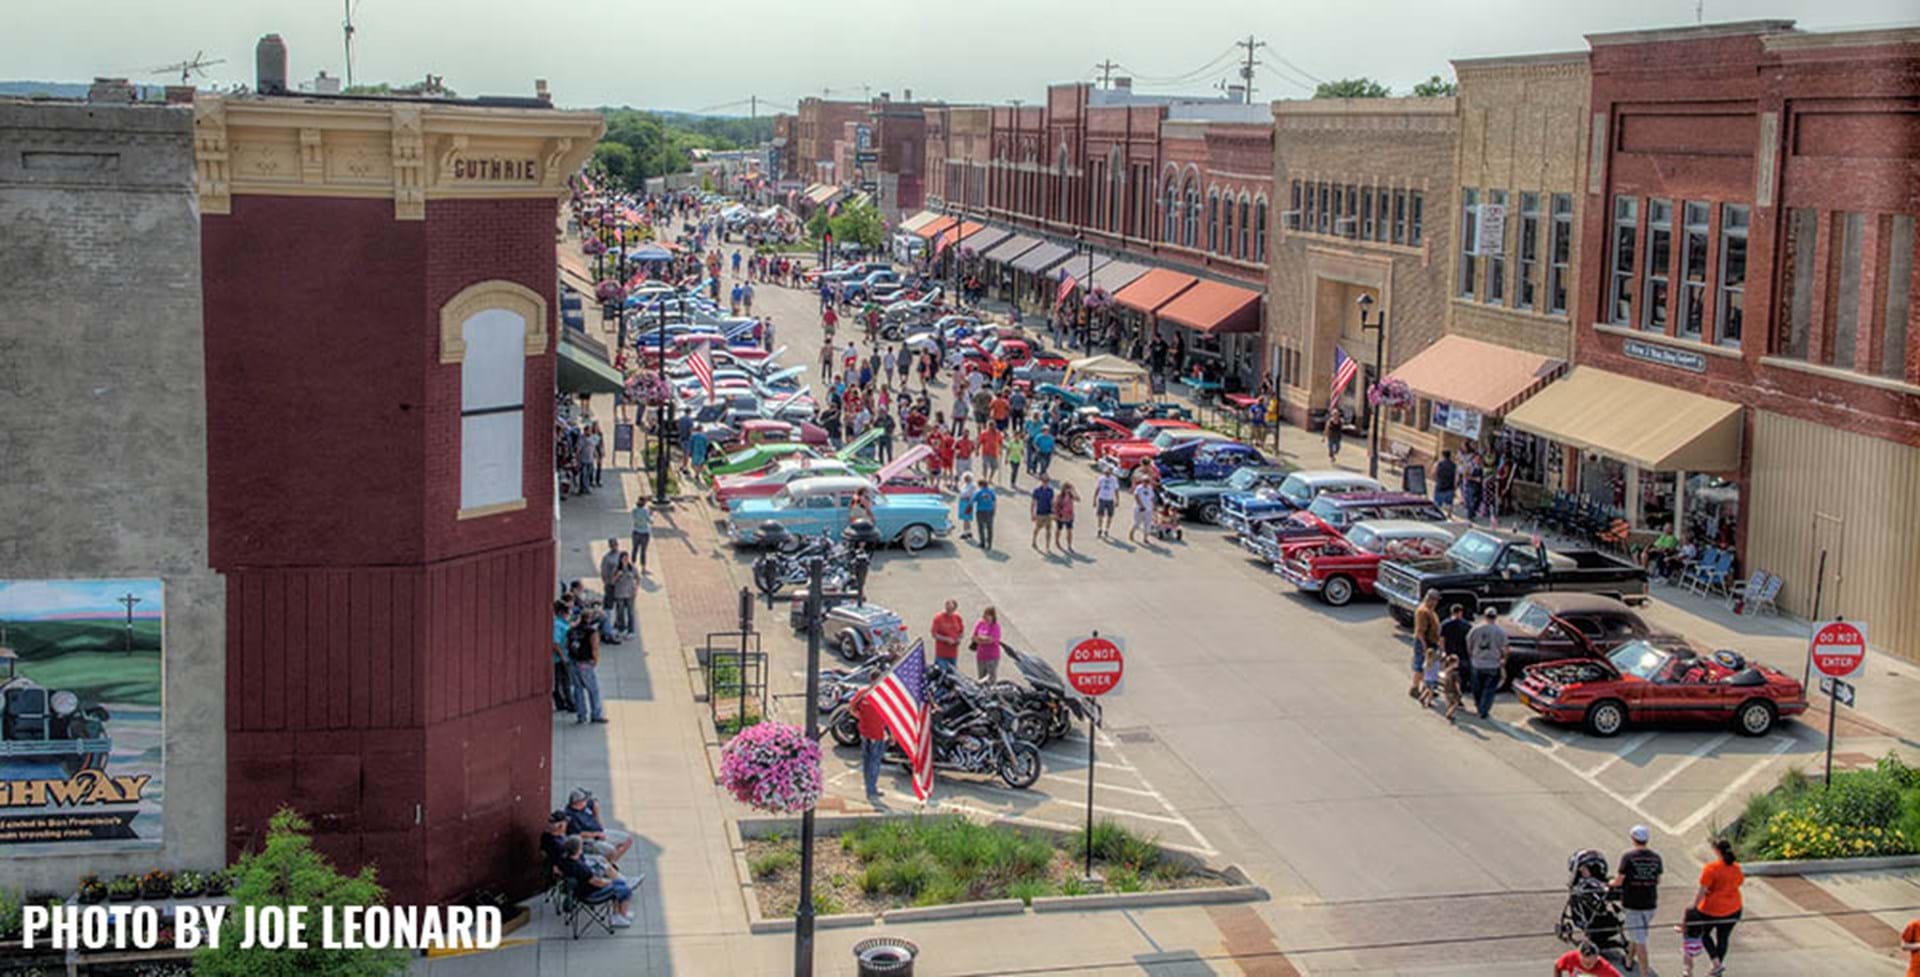 Iowa Valley Scenic Byway: Belle Plaine Car Show